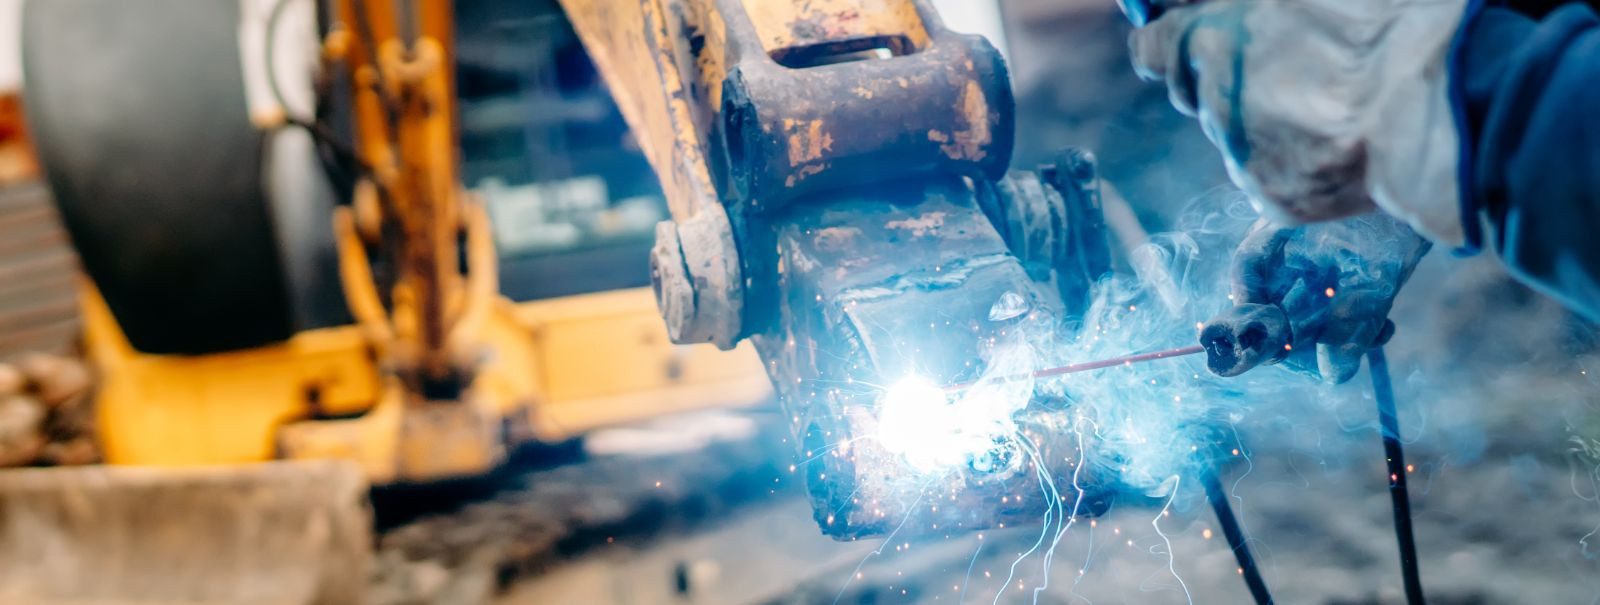 Introduction to Mobile WeldingMobile welding is revolutionizing the way businesses and individuals access professional metalwork services. By bringing the works